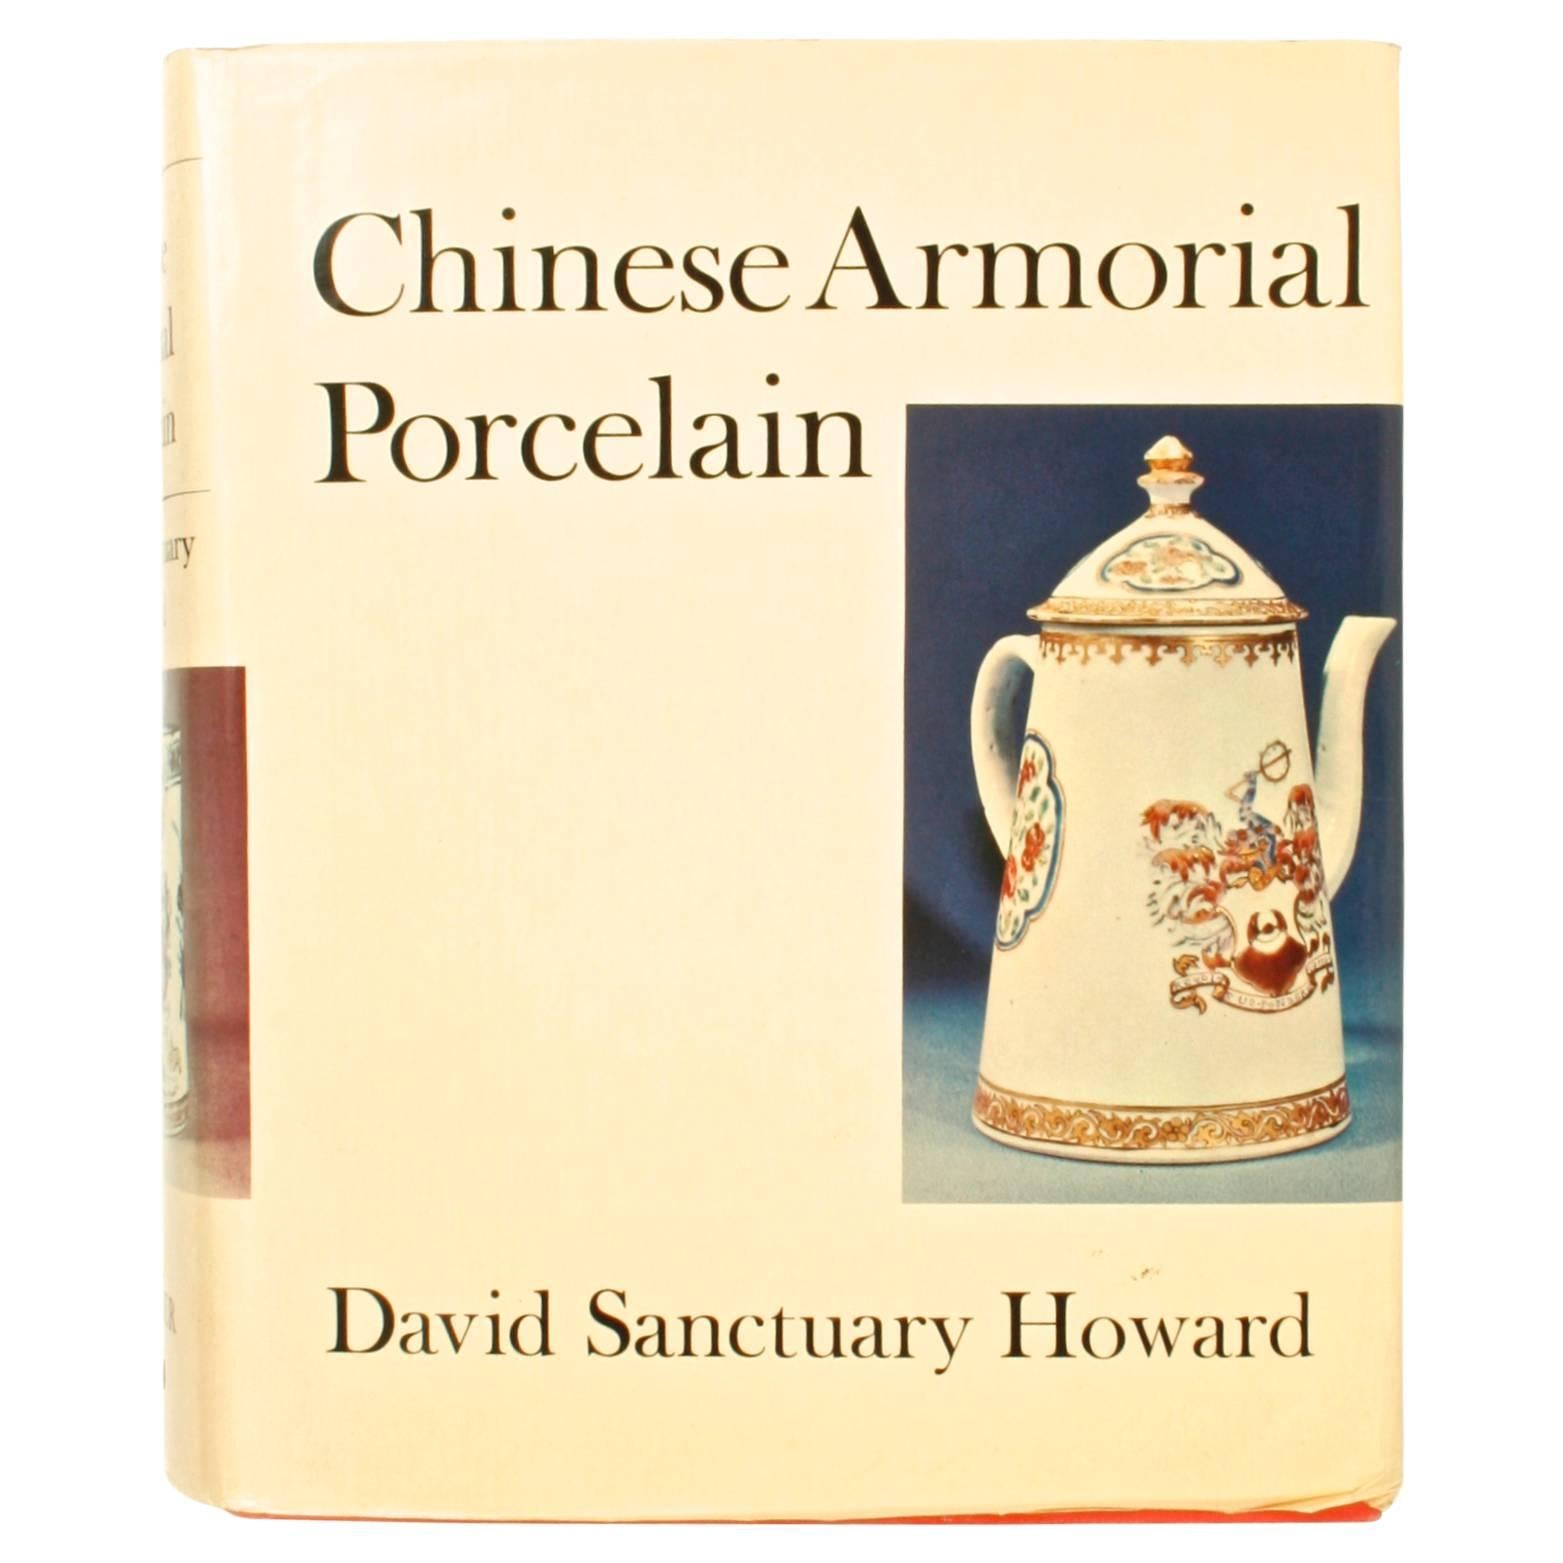 Chinese Armorial Porcelain by David Sanctuary Howard, Inscribed by the Author